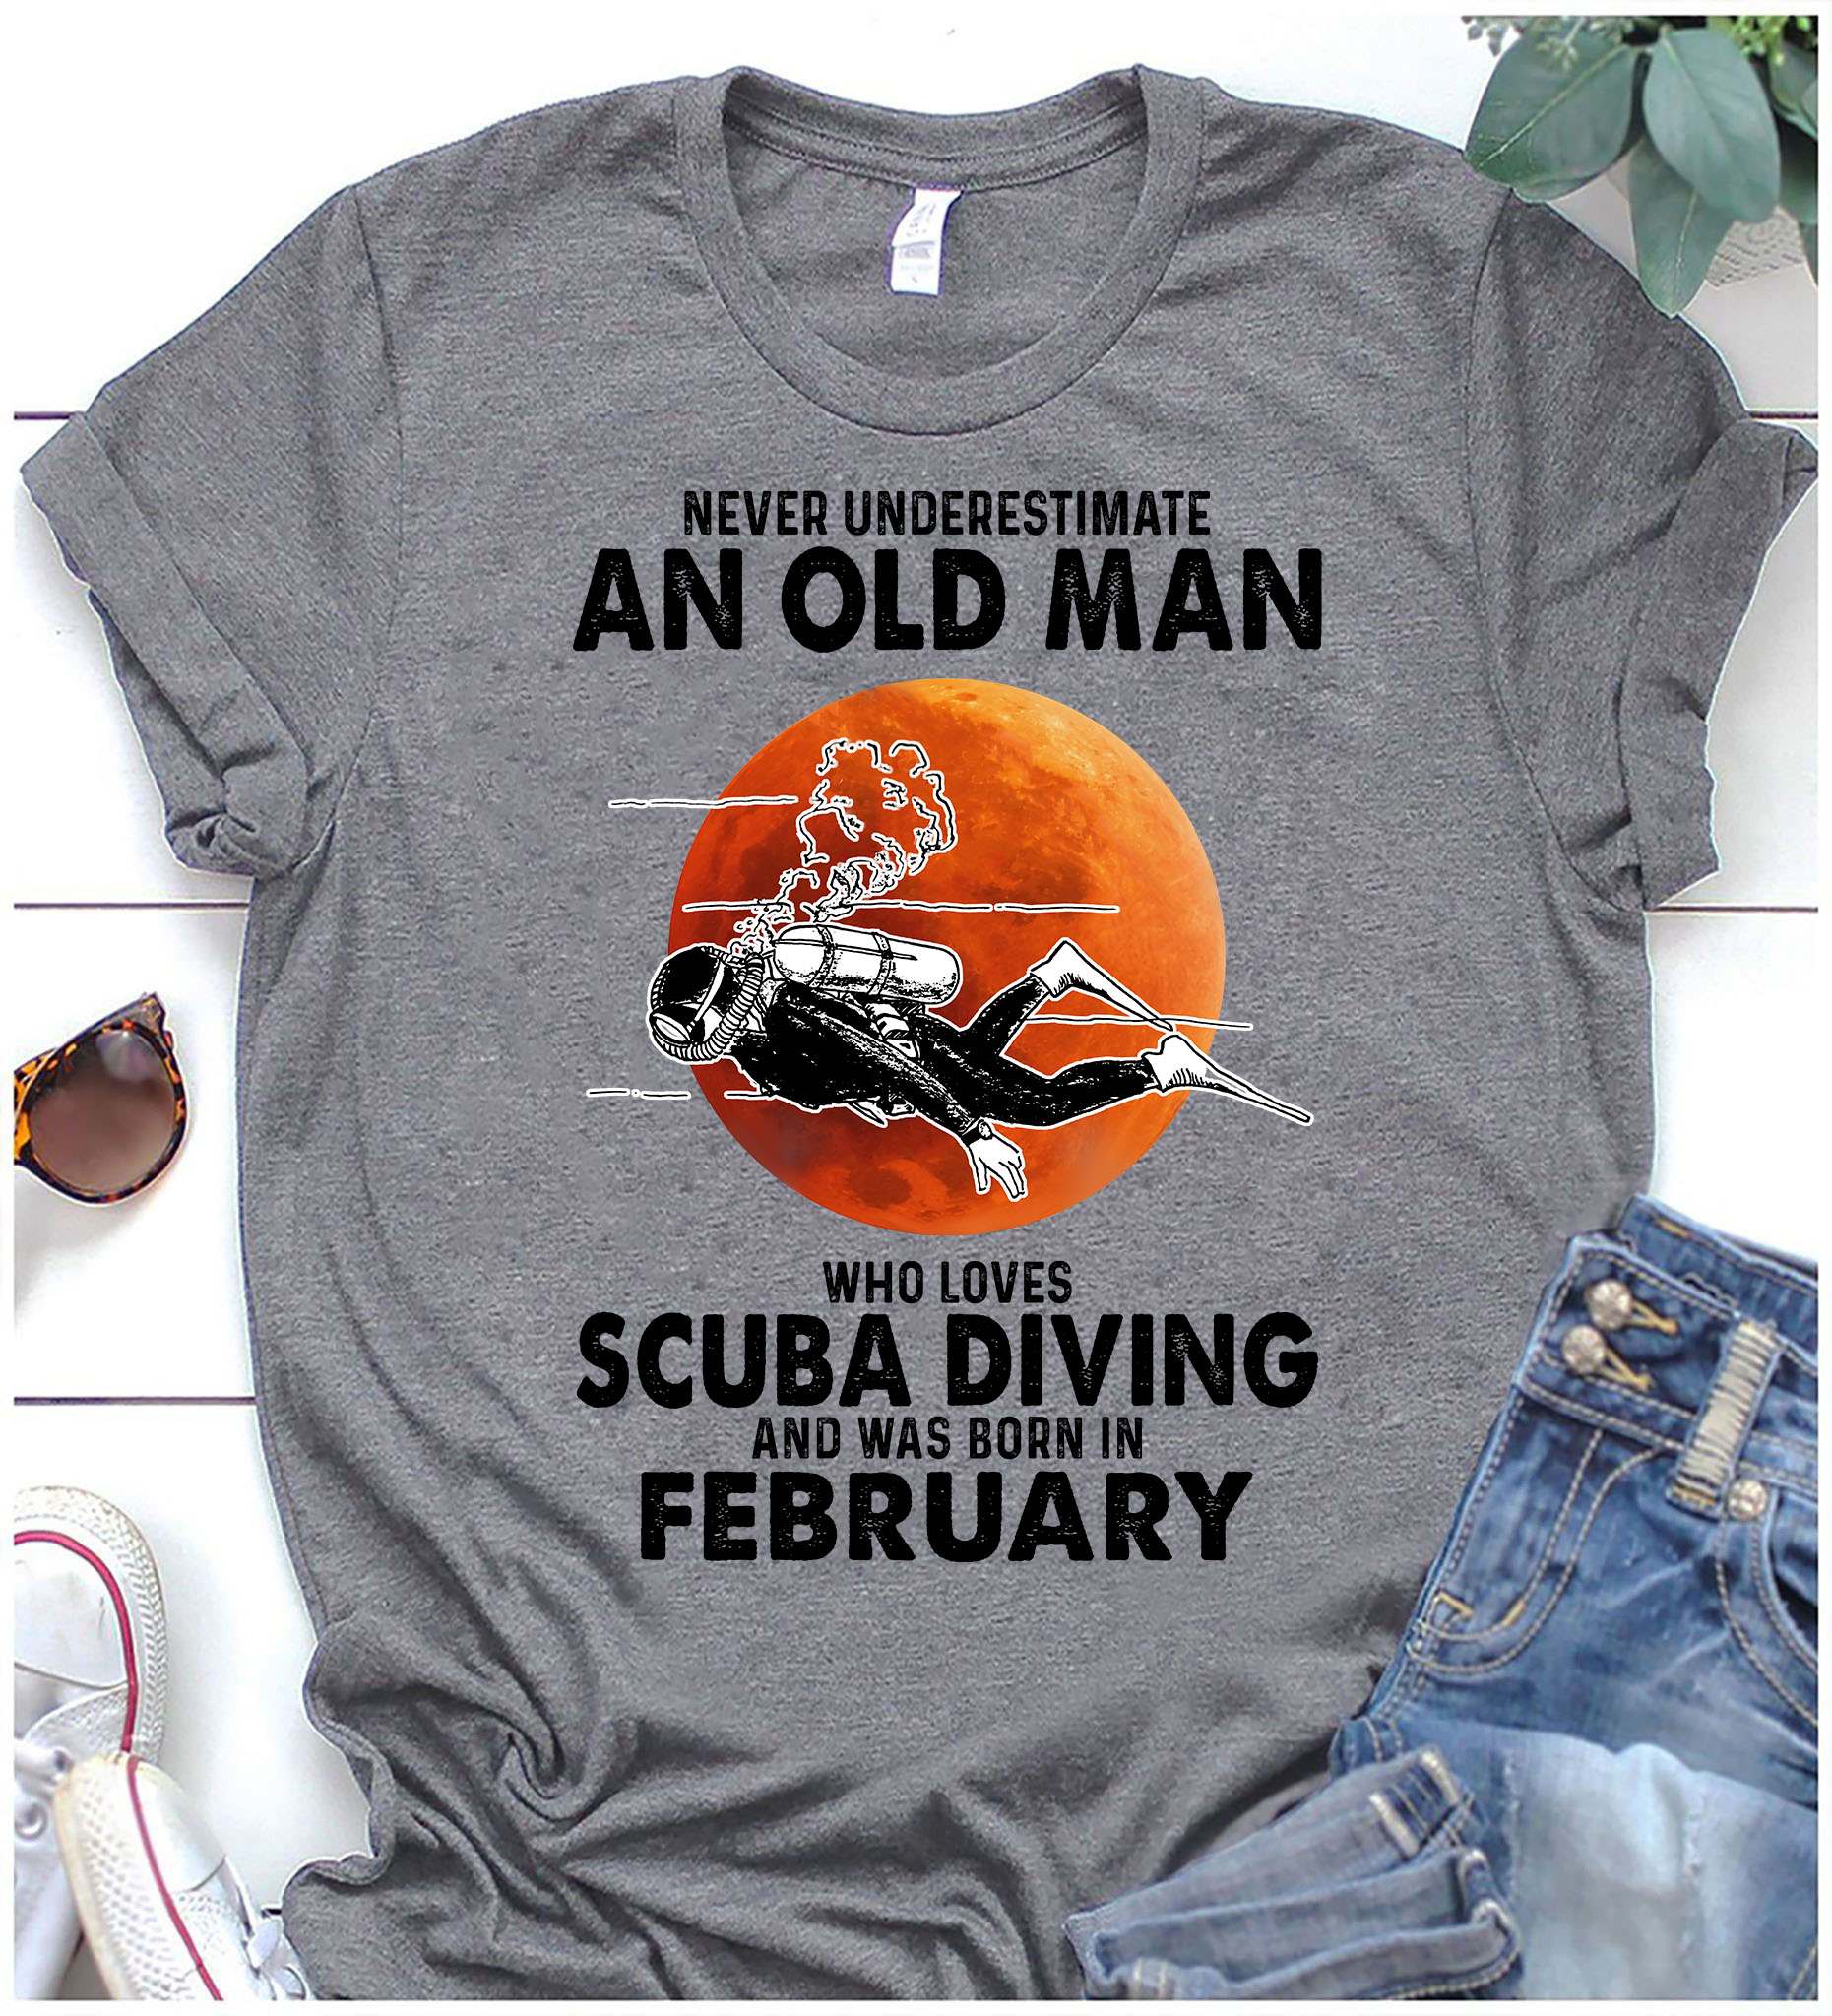 Scuba Diving, February Birthday Man - Never underestimate an old man who loves skiing and was born in february